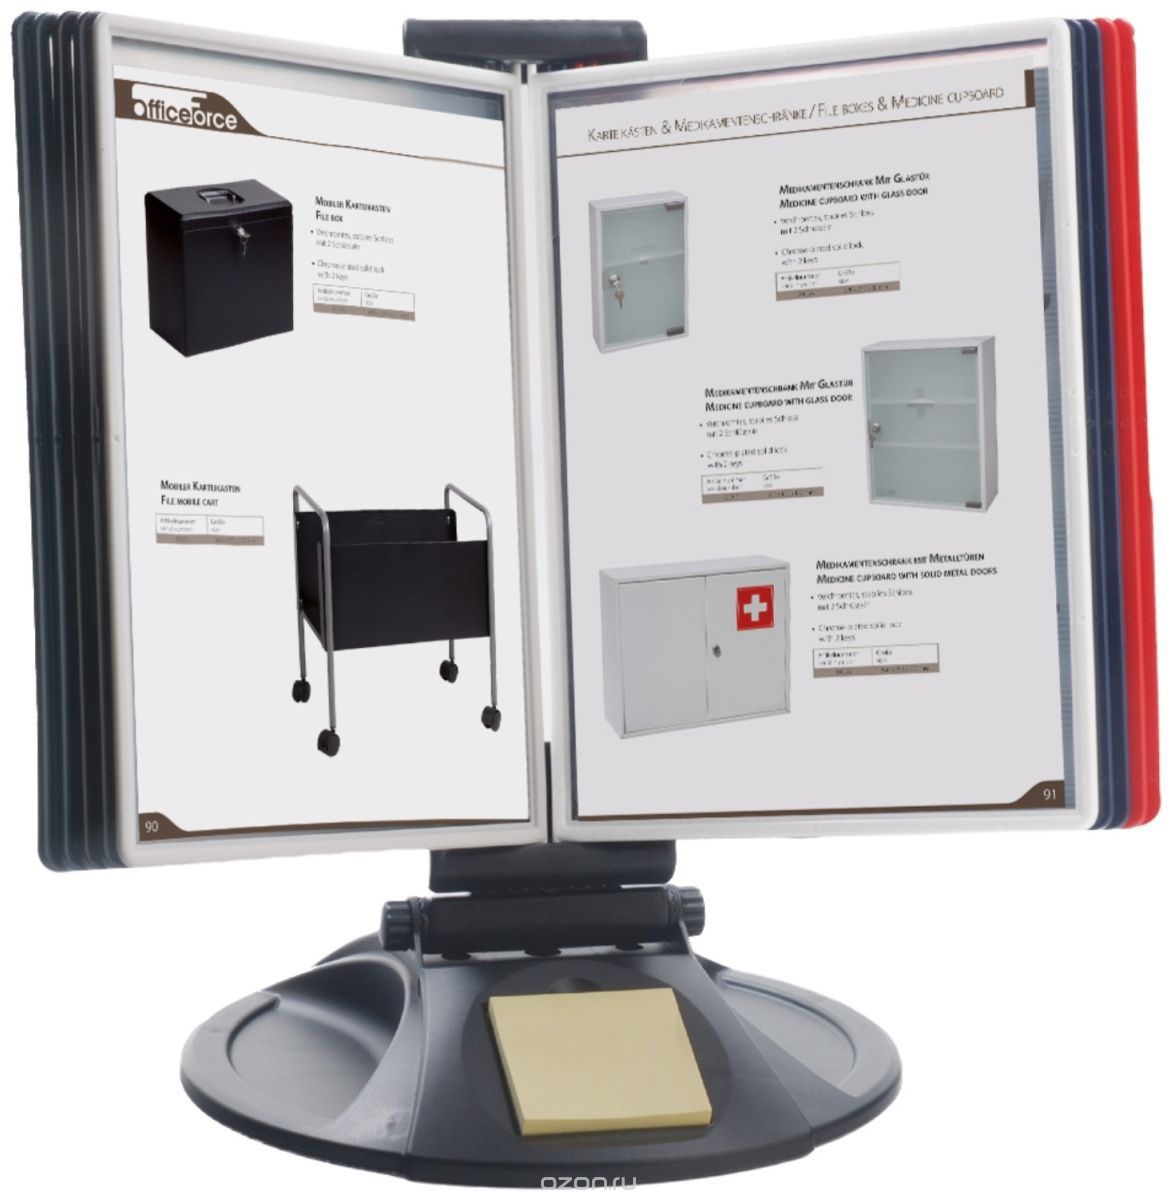 Office Force Stationery   Qulck-Vlew Information Display 4  